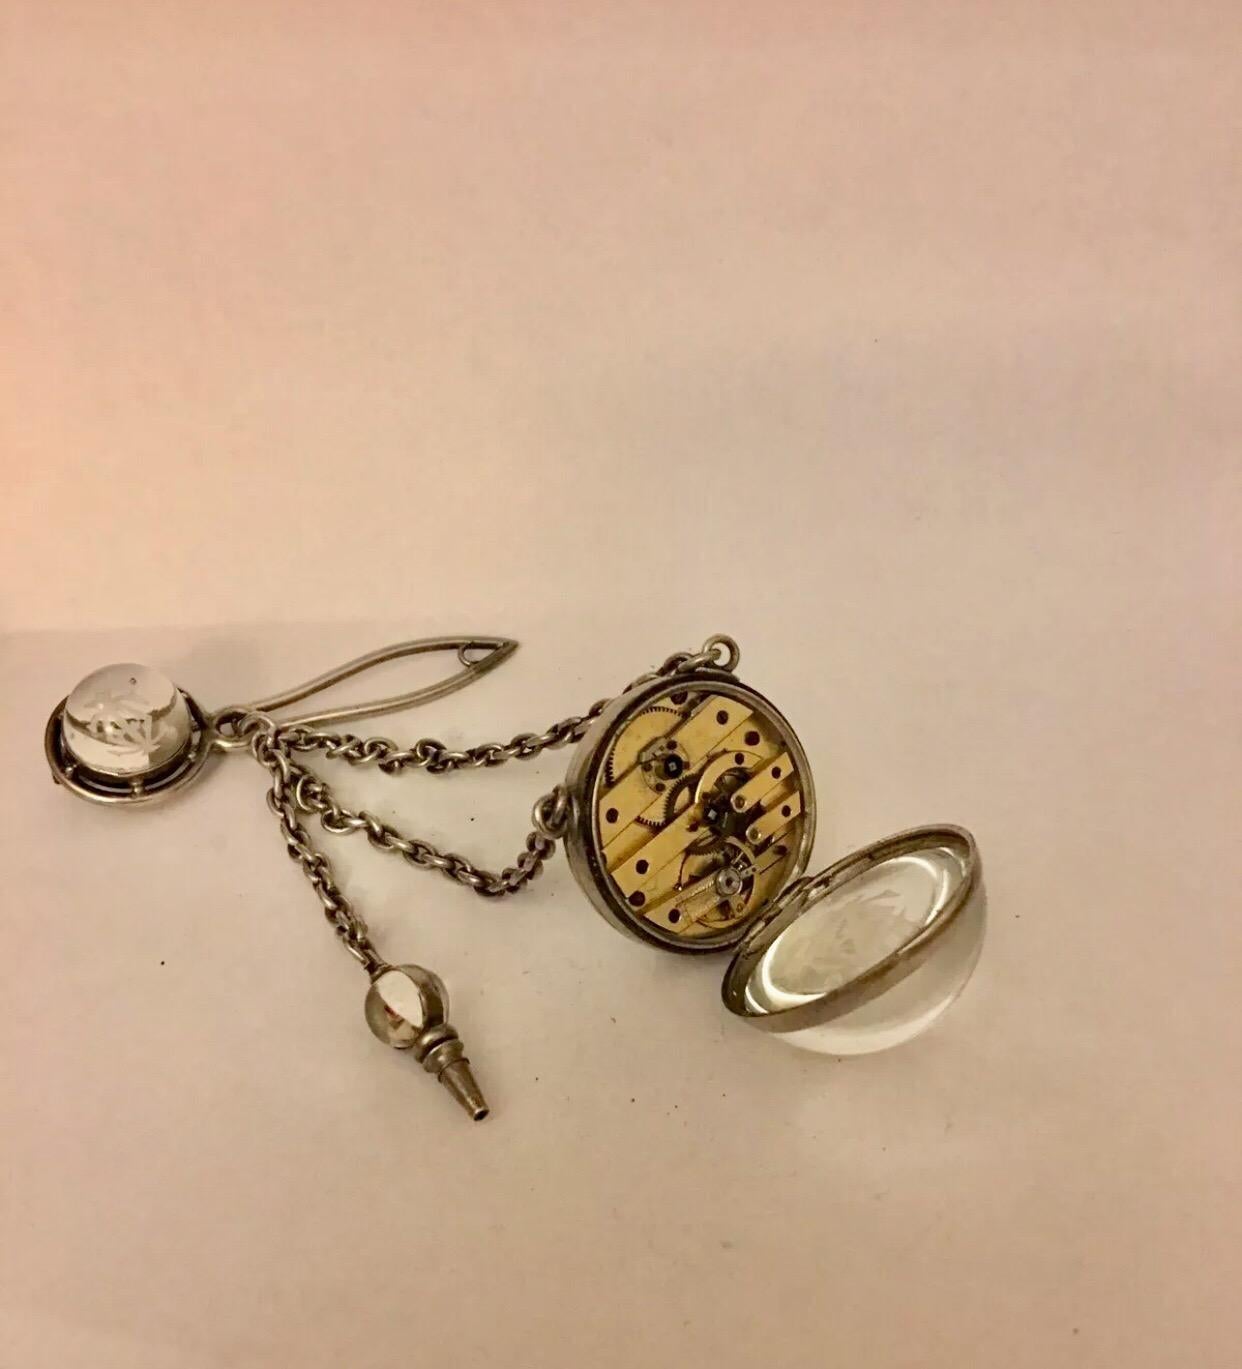 Antique Silver Glass Ball Pocket Watch with Matching Silver Glass Chatelaine For Sale 5